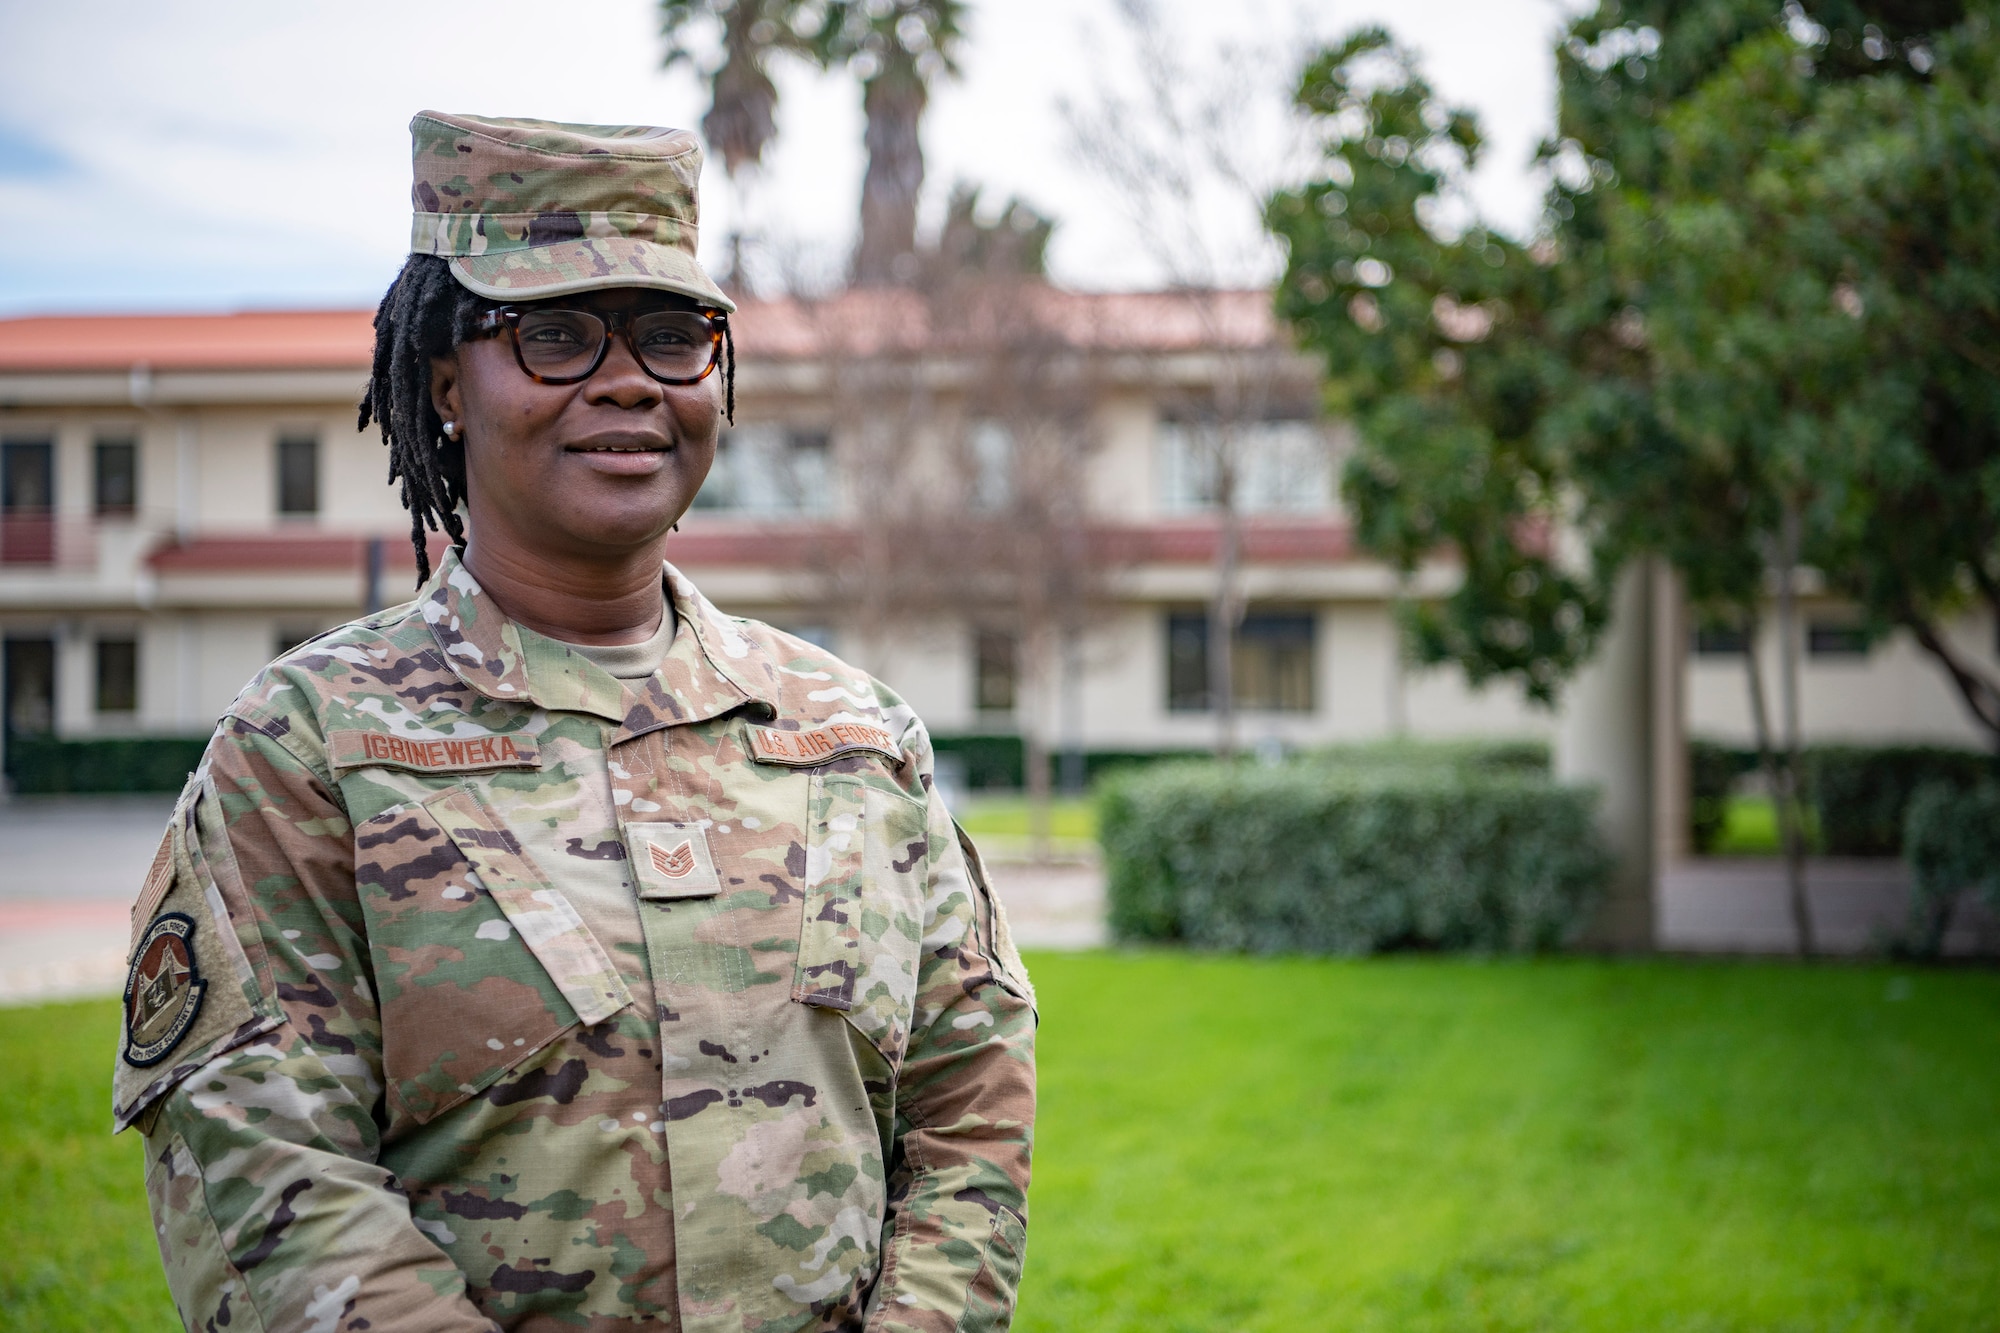 TSgt. Alexander Igbineweka, noncommissioned officer in charge with the force support management function, 349 MSG, has been recognized as a team player and has been awarded several and recognized as a prominent contributor to the mission.